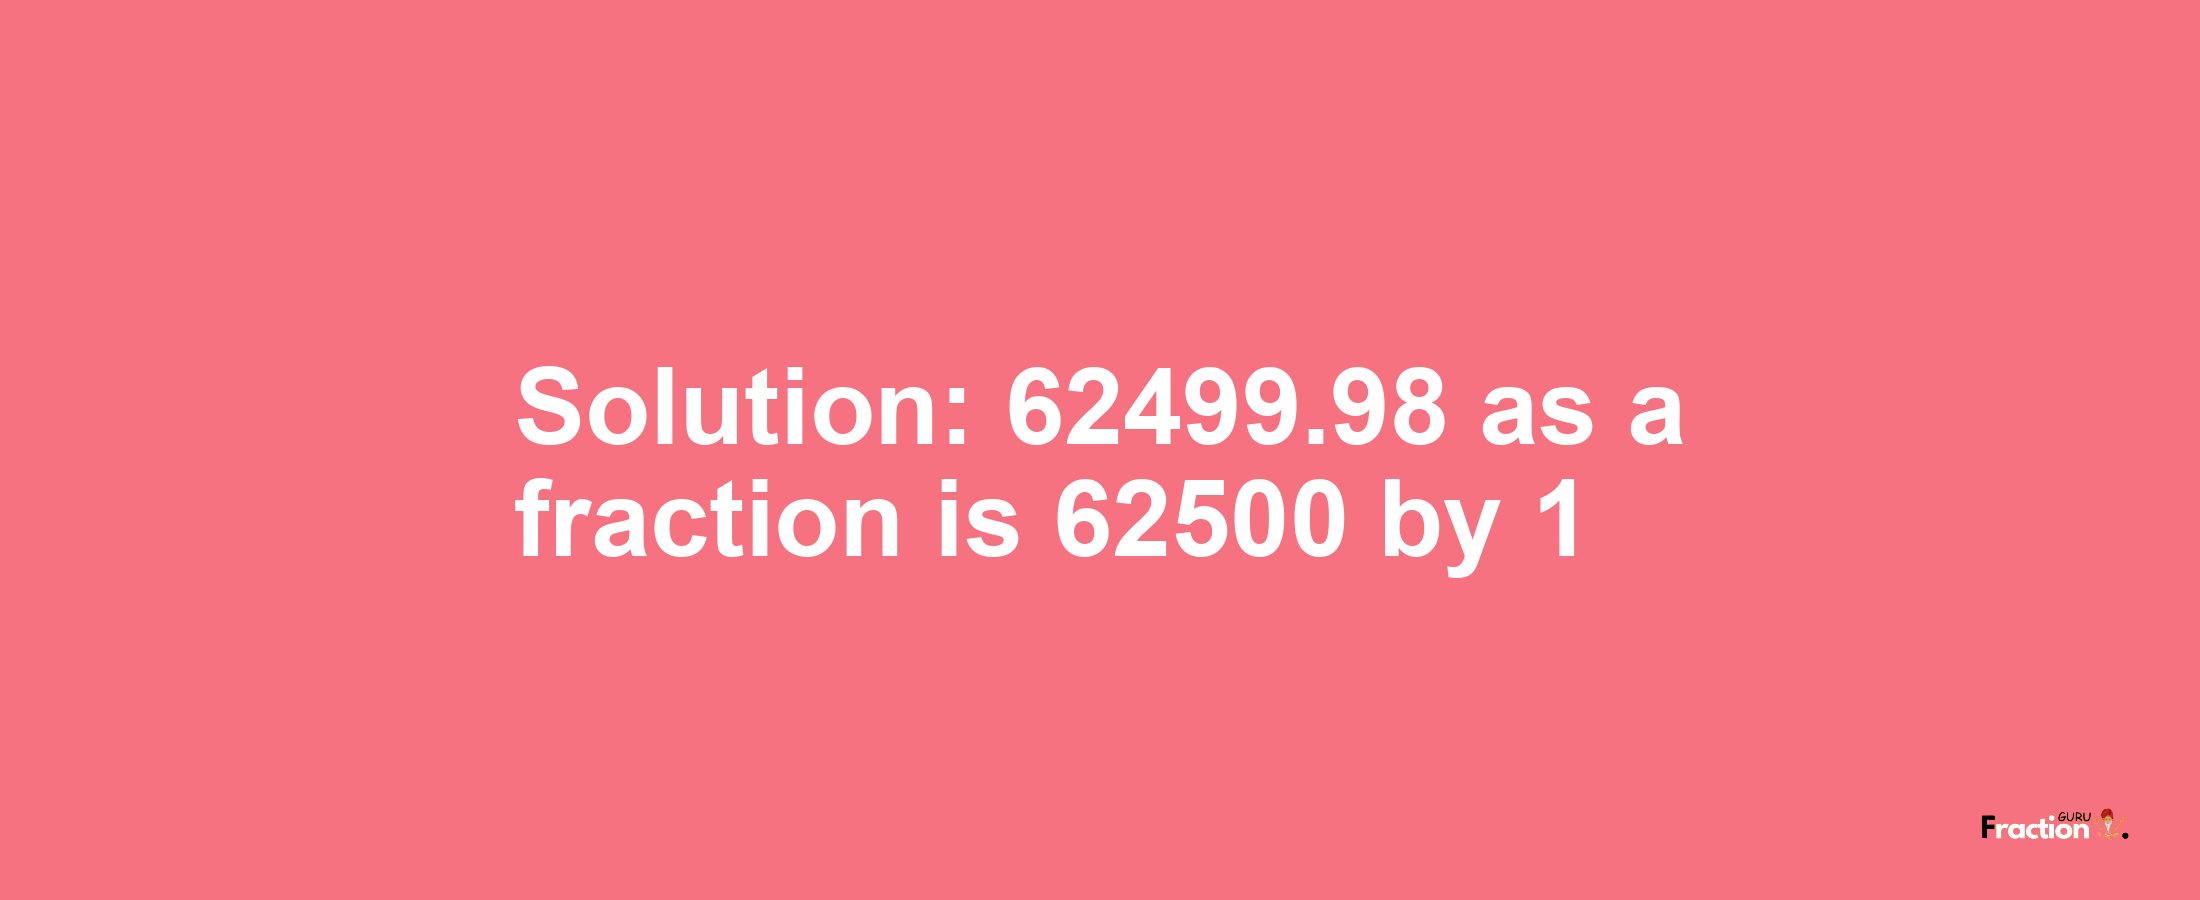 Solution:62499.98 as a fraction is 62500/1